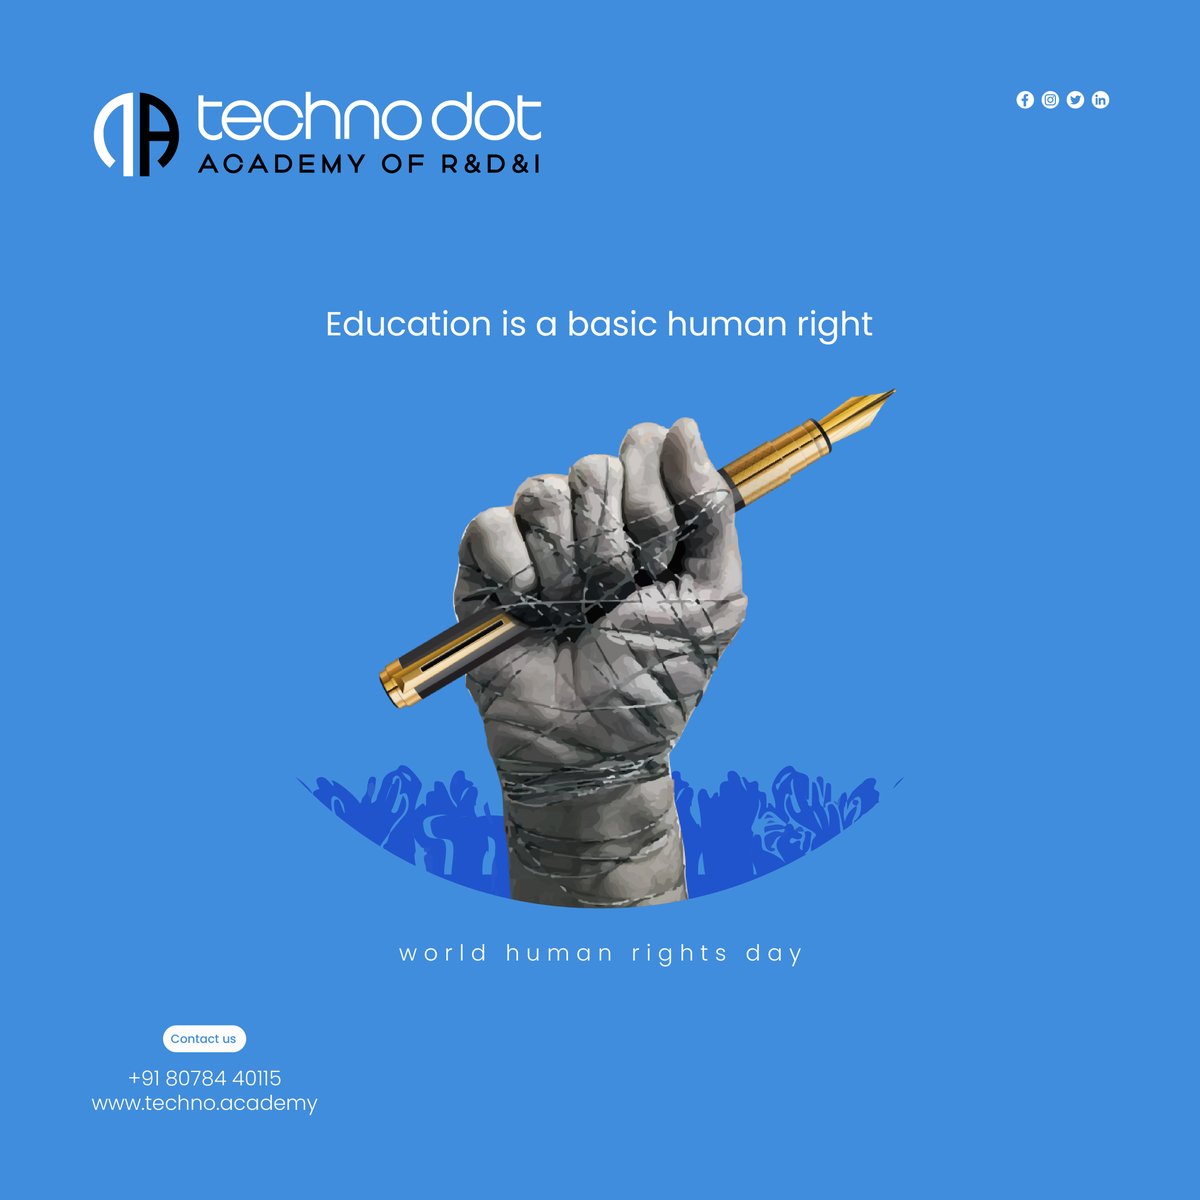 Education empowers and thrives future generations. Let's uphold the right to education for all on this International Human Rights Day.

#HumanRightsDay2022 #educationmatters #RightToEducation #education  #technodotacademy